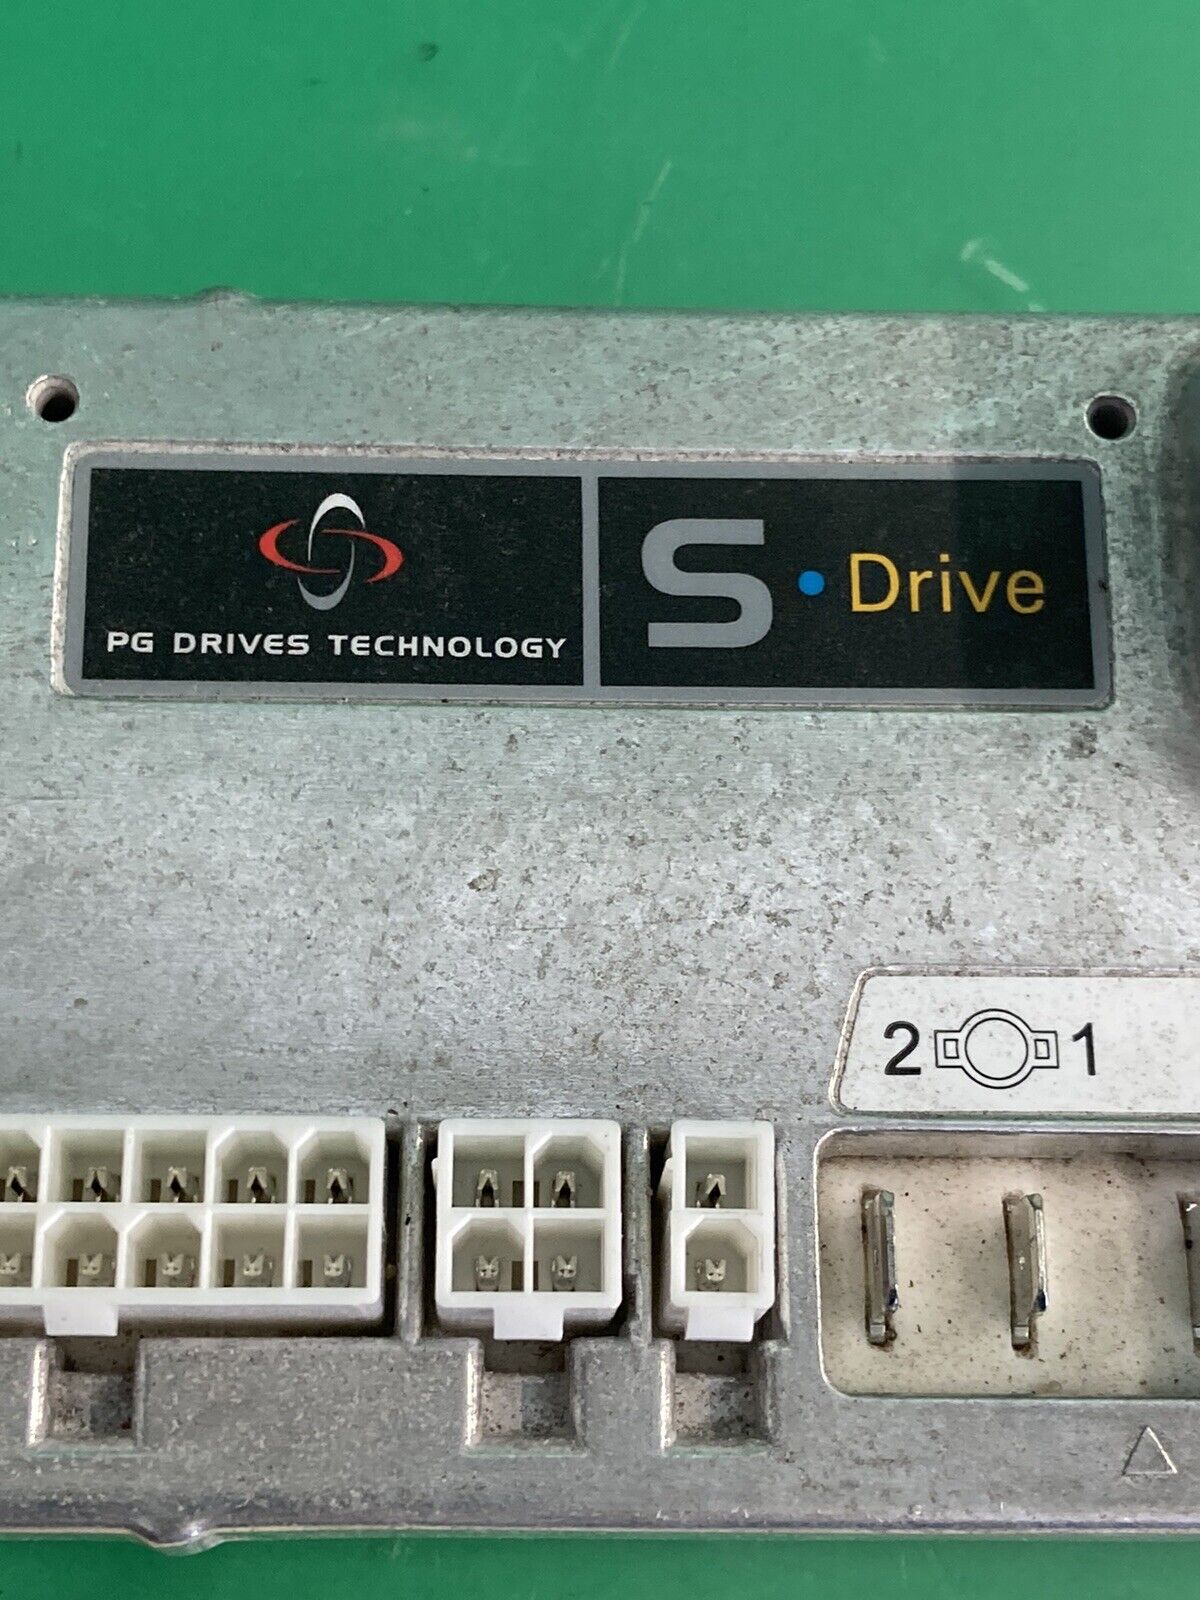 45 AMP S-Drive Controller Module for Mobility Scooter D51270.06 SDRIVE #J629